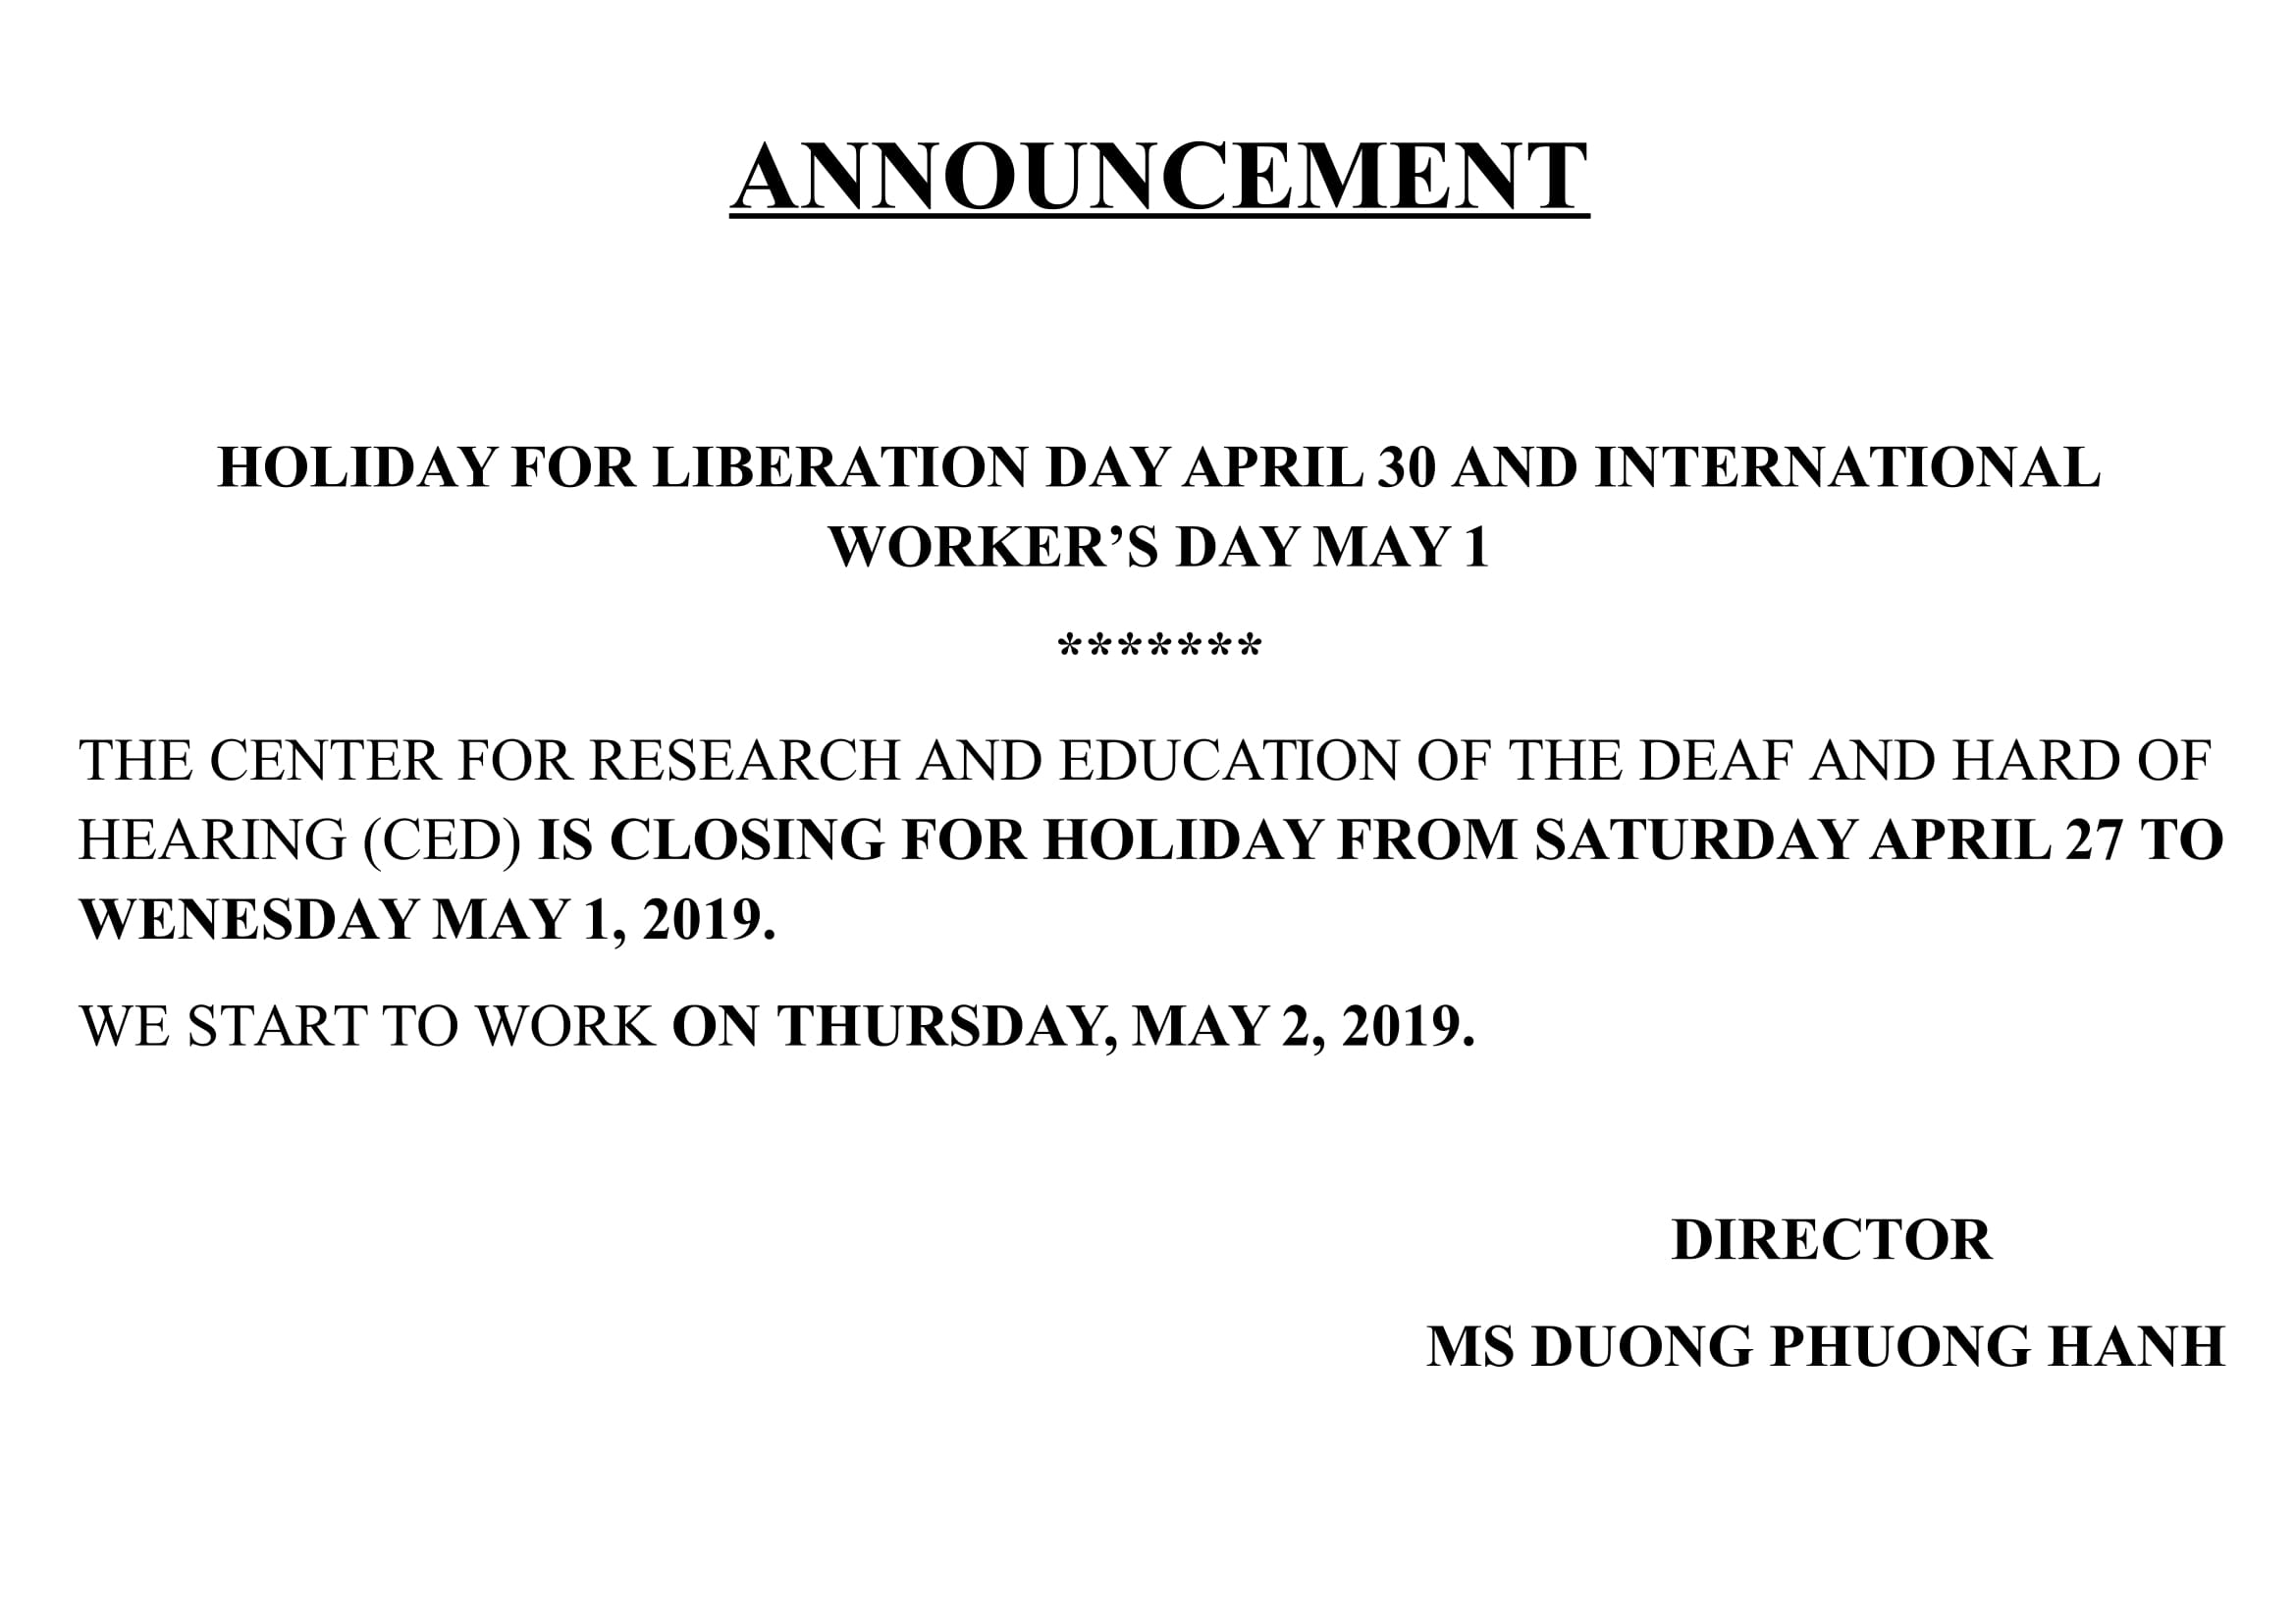 ANNOUCEMENT: HOLIDAY FOR LIBERATION DAY APRIL 30 AND INTERNATIONAL WORKER’S DAY MAY 1 (2019)